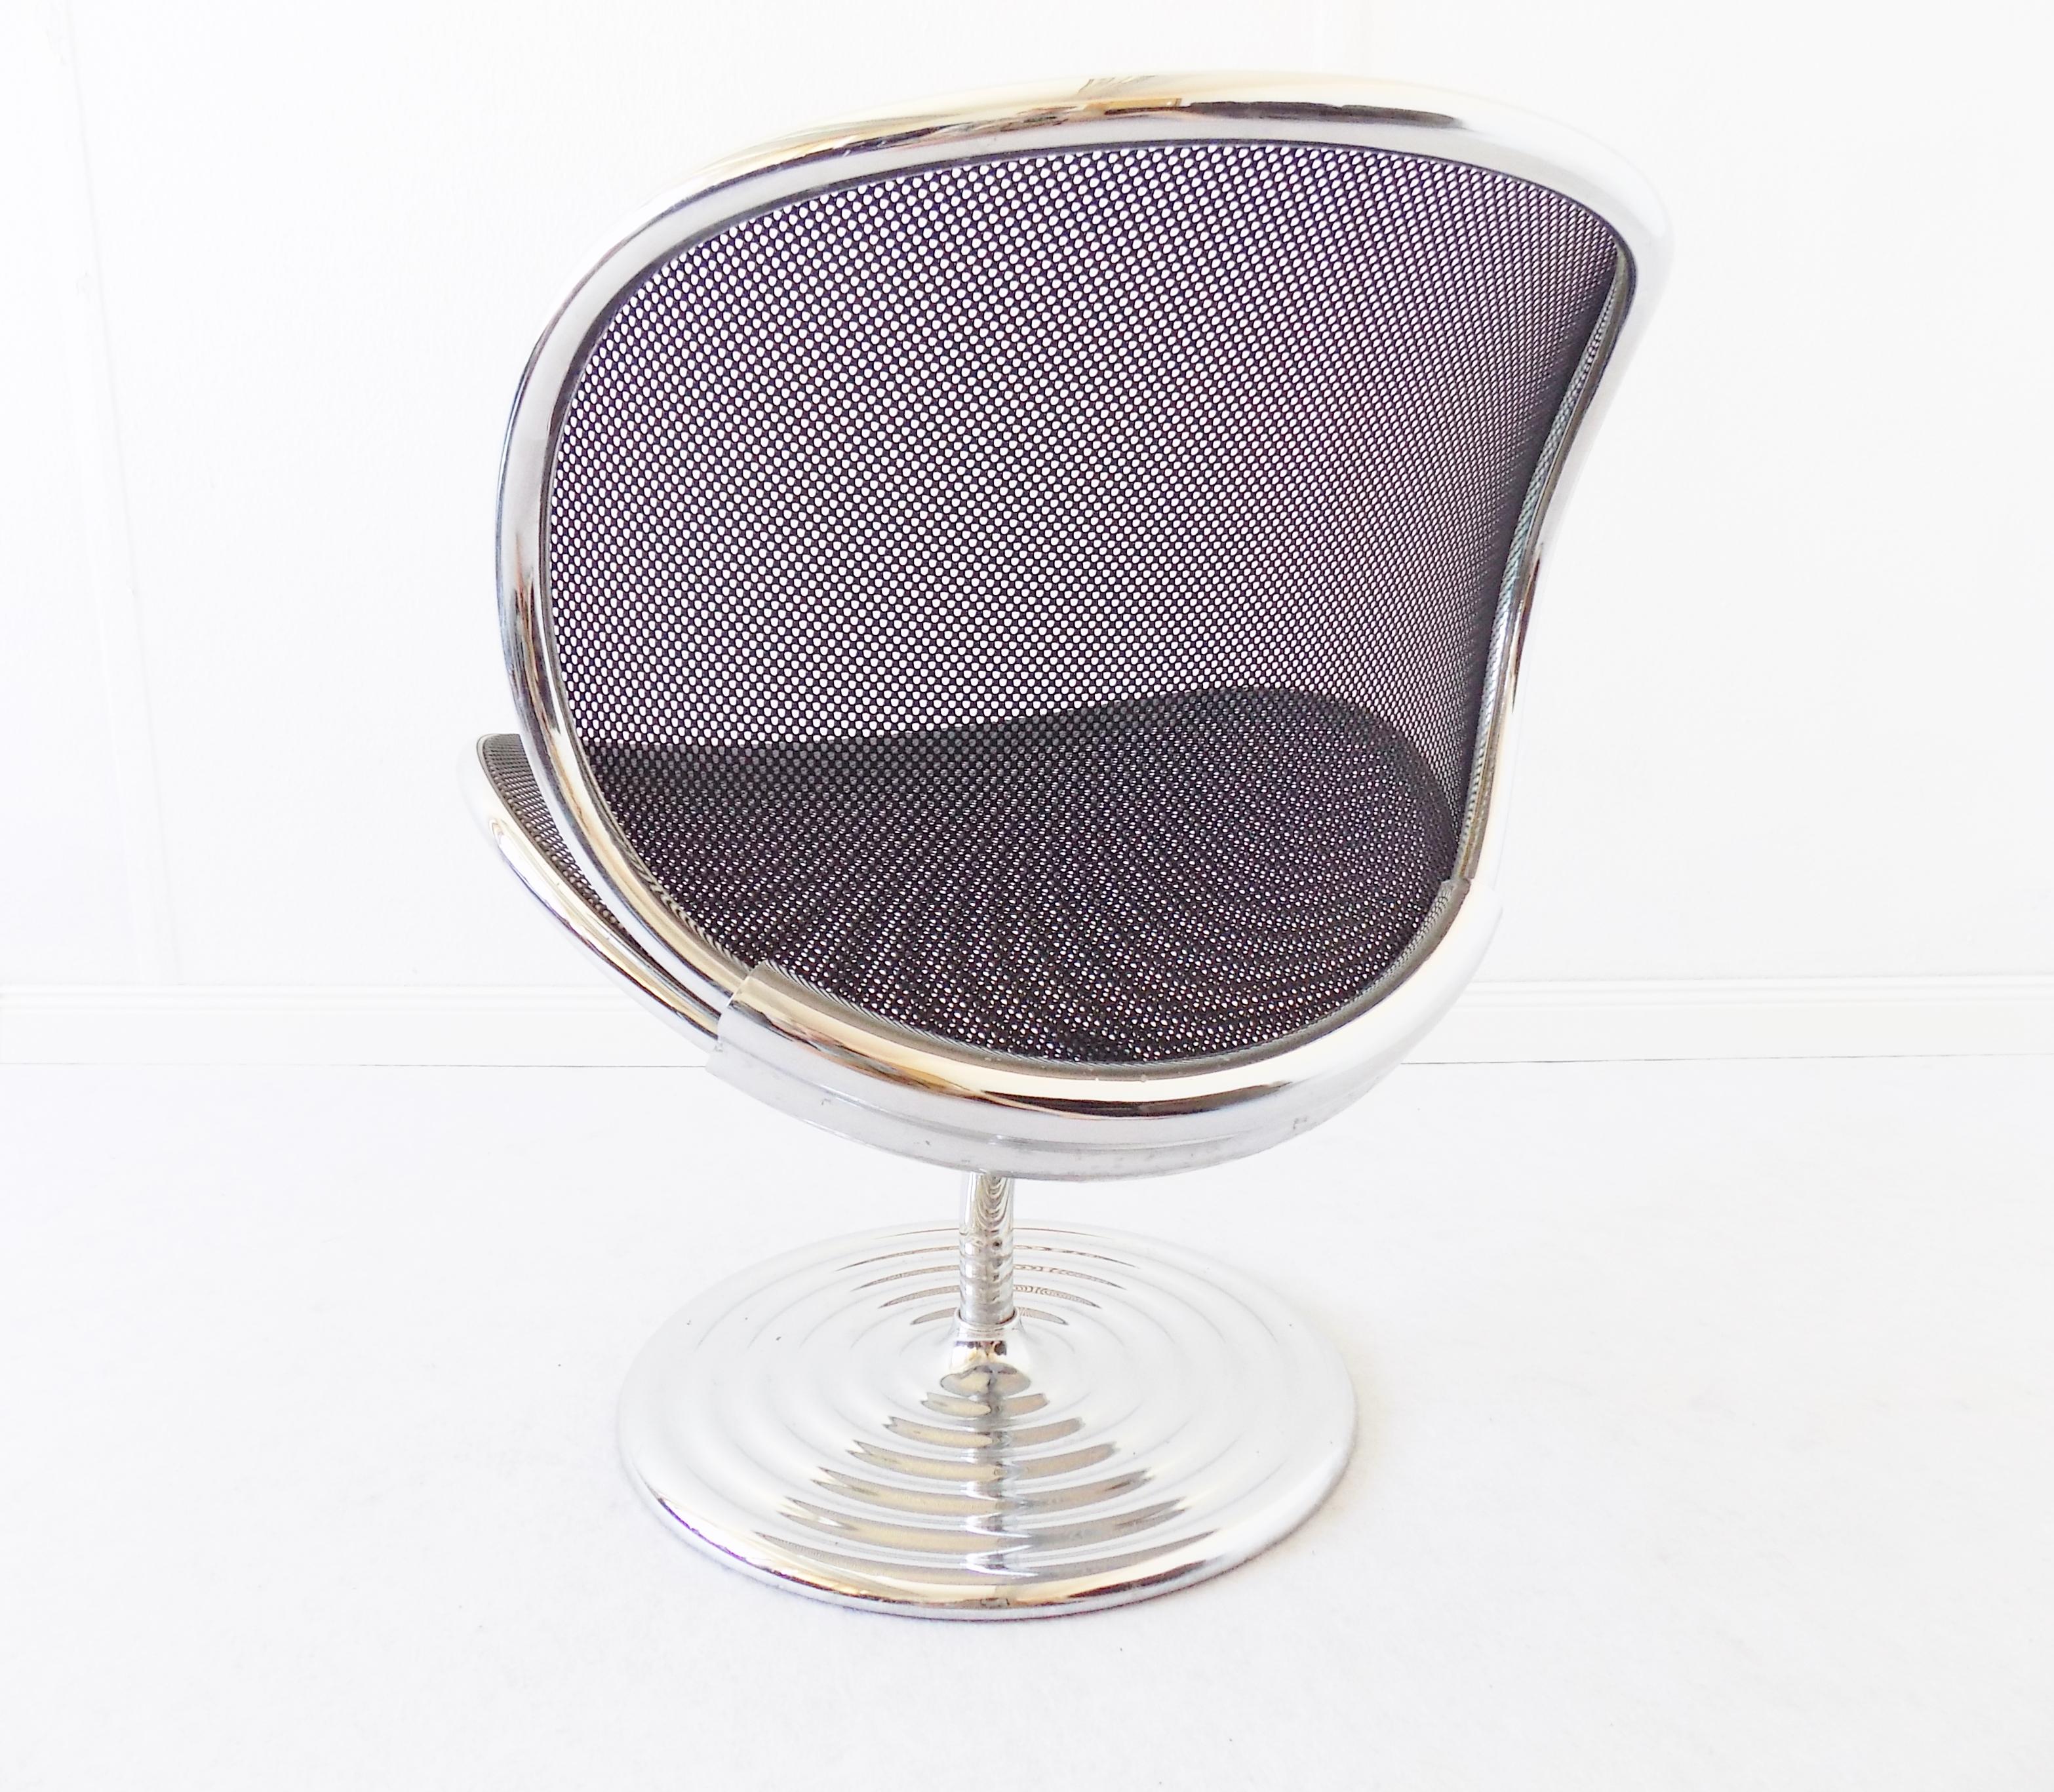 Modern Wilkhahn O Line Lounge Chair by Herbert Ohl, German Design, swivel, contemporary For Sale